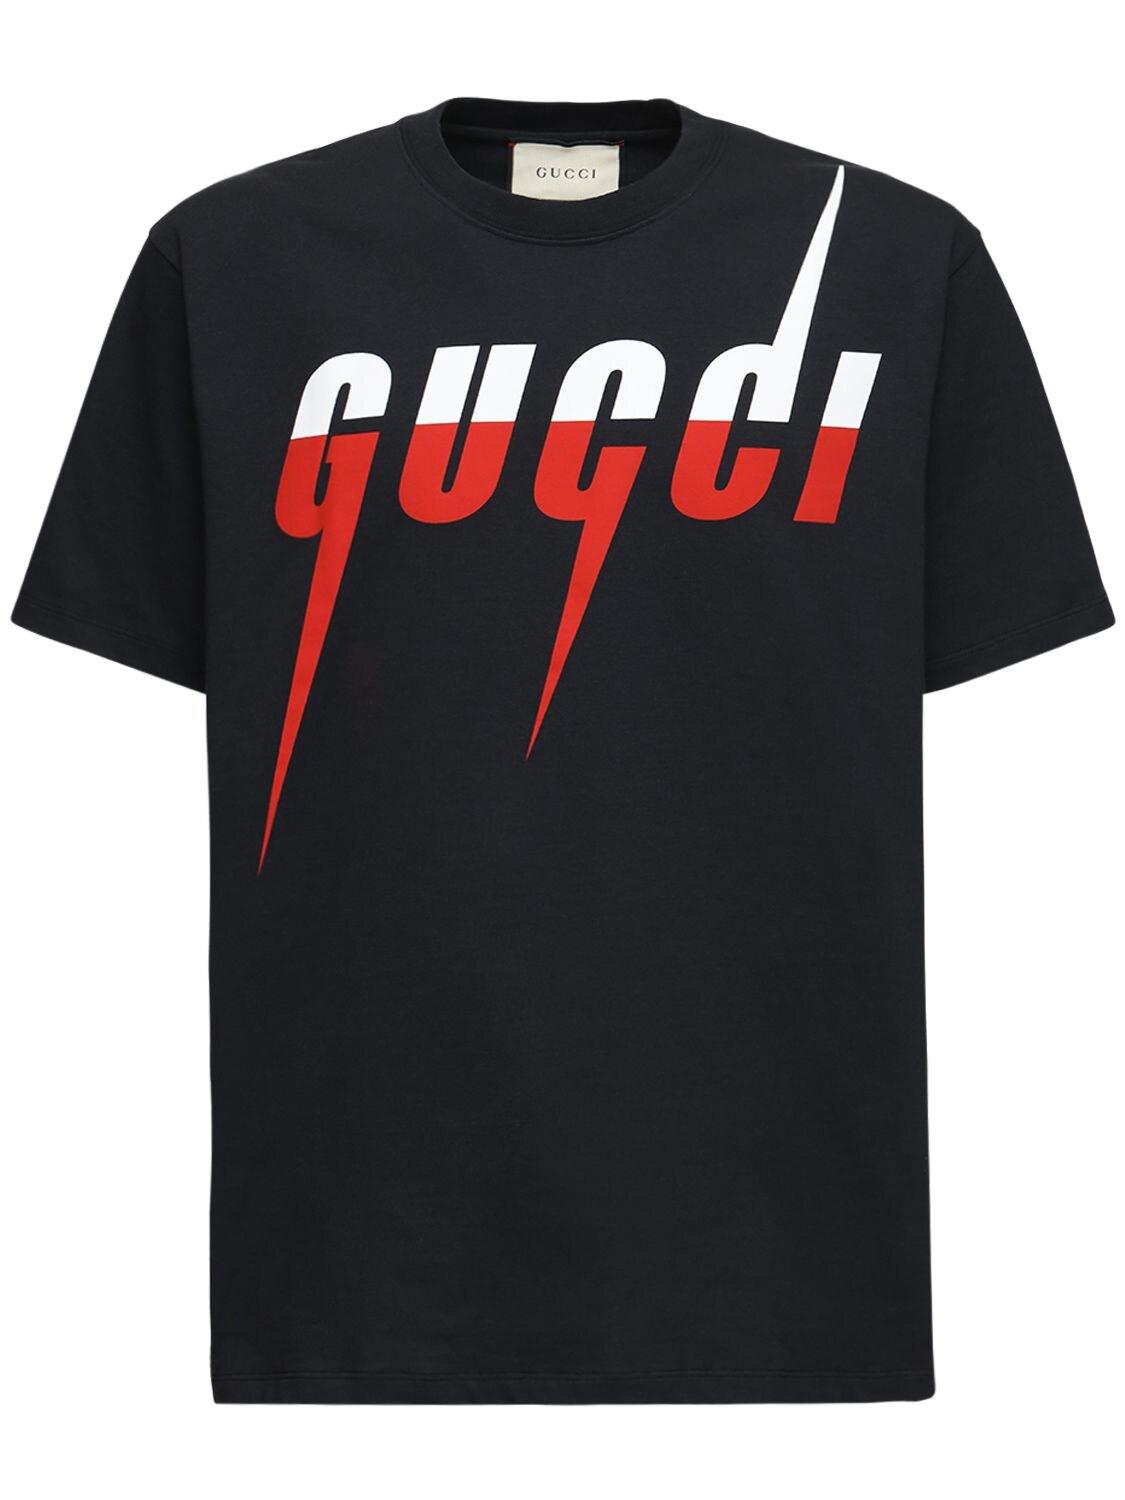 Gucci T-shirt With Blade Print in Black for Men | Lyst